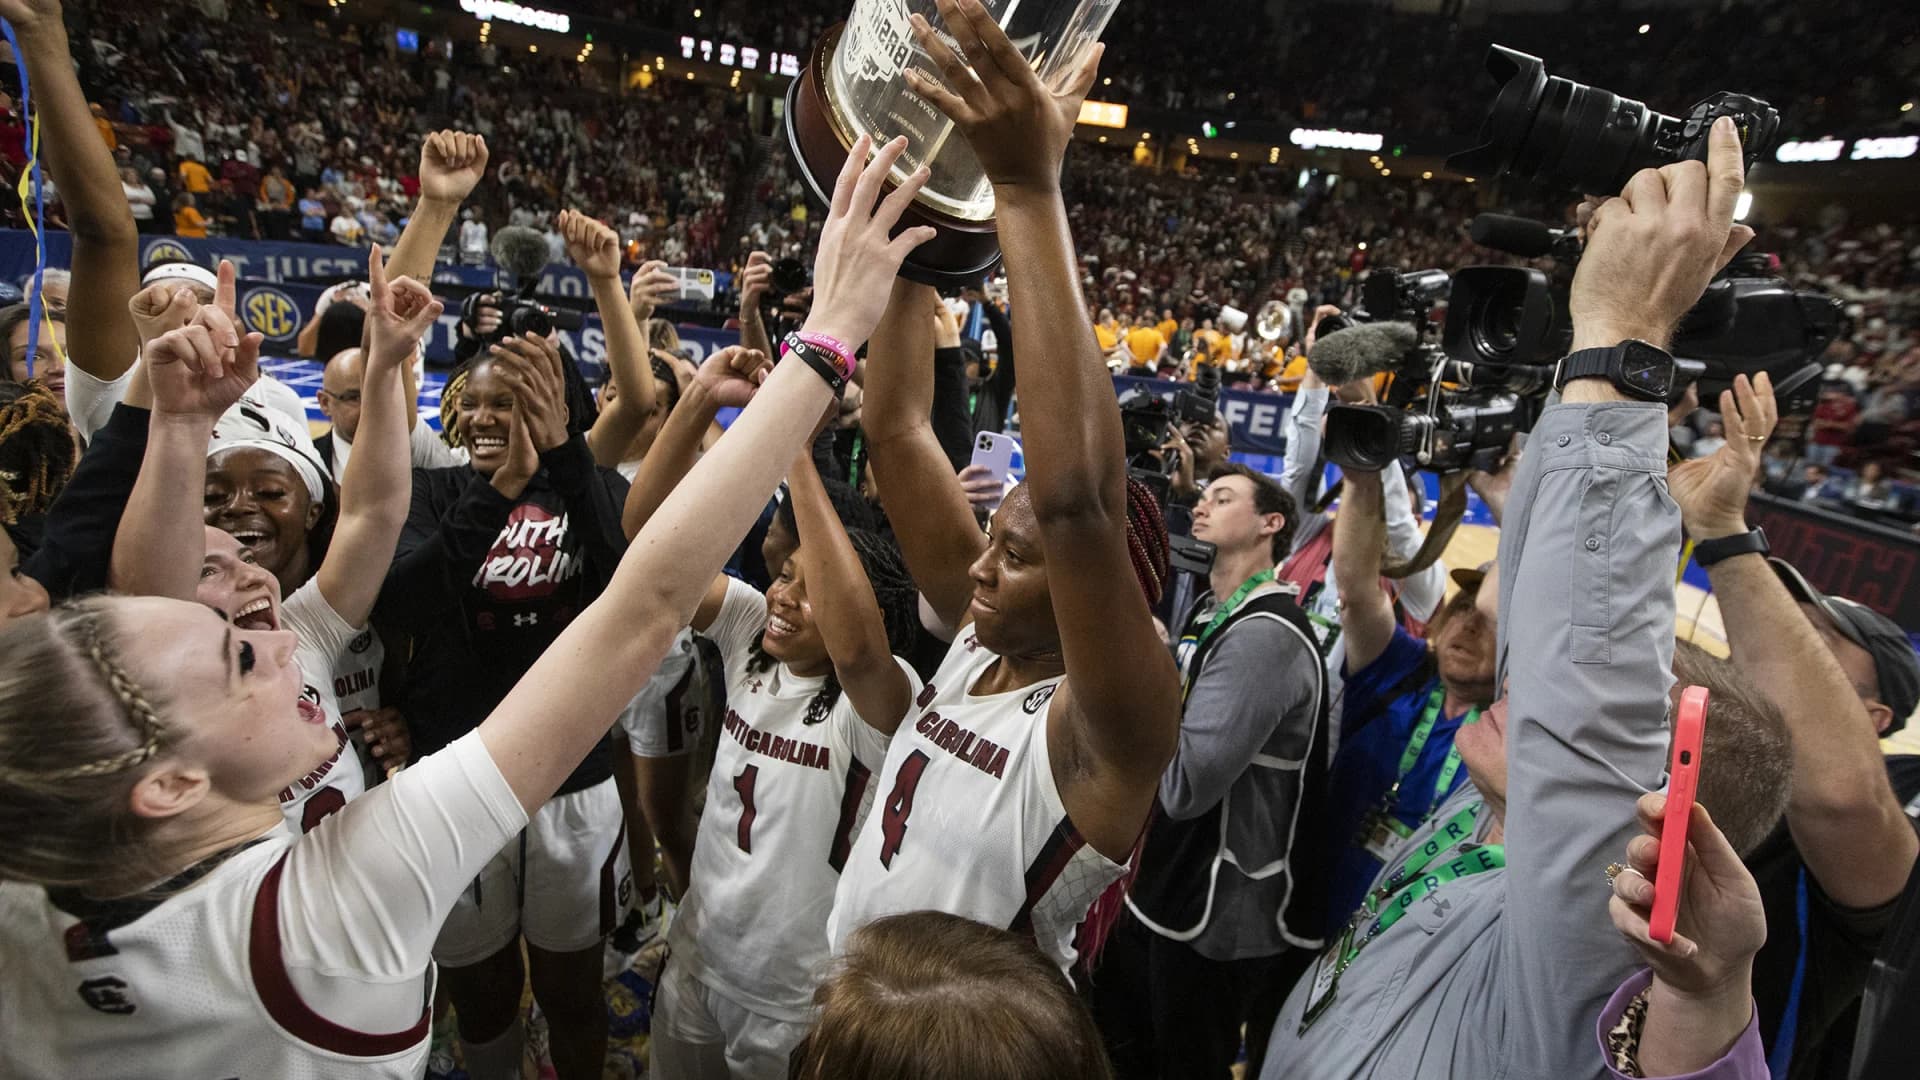 South Carolina No. 1 overall seed in women's NCAA Tournament